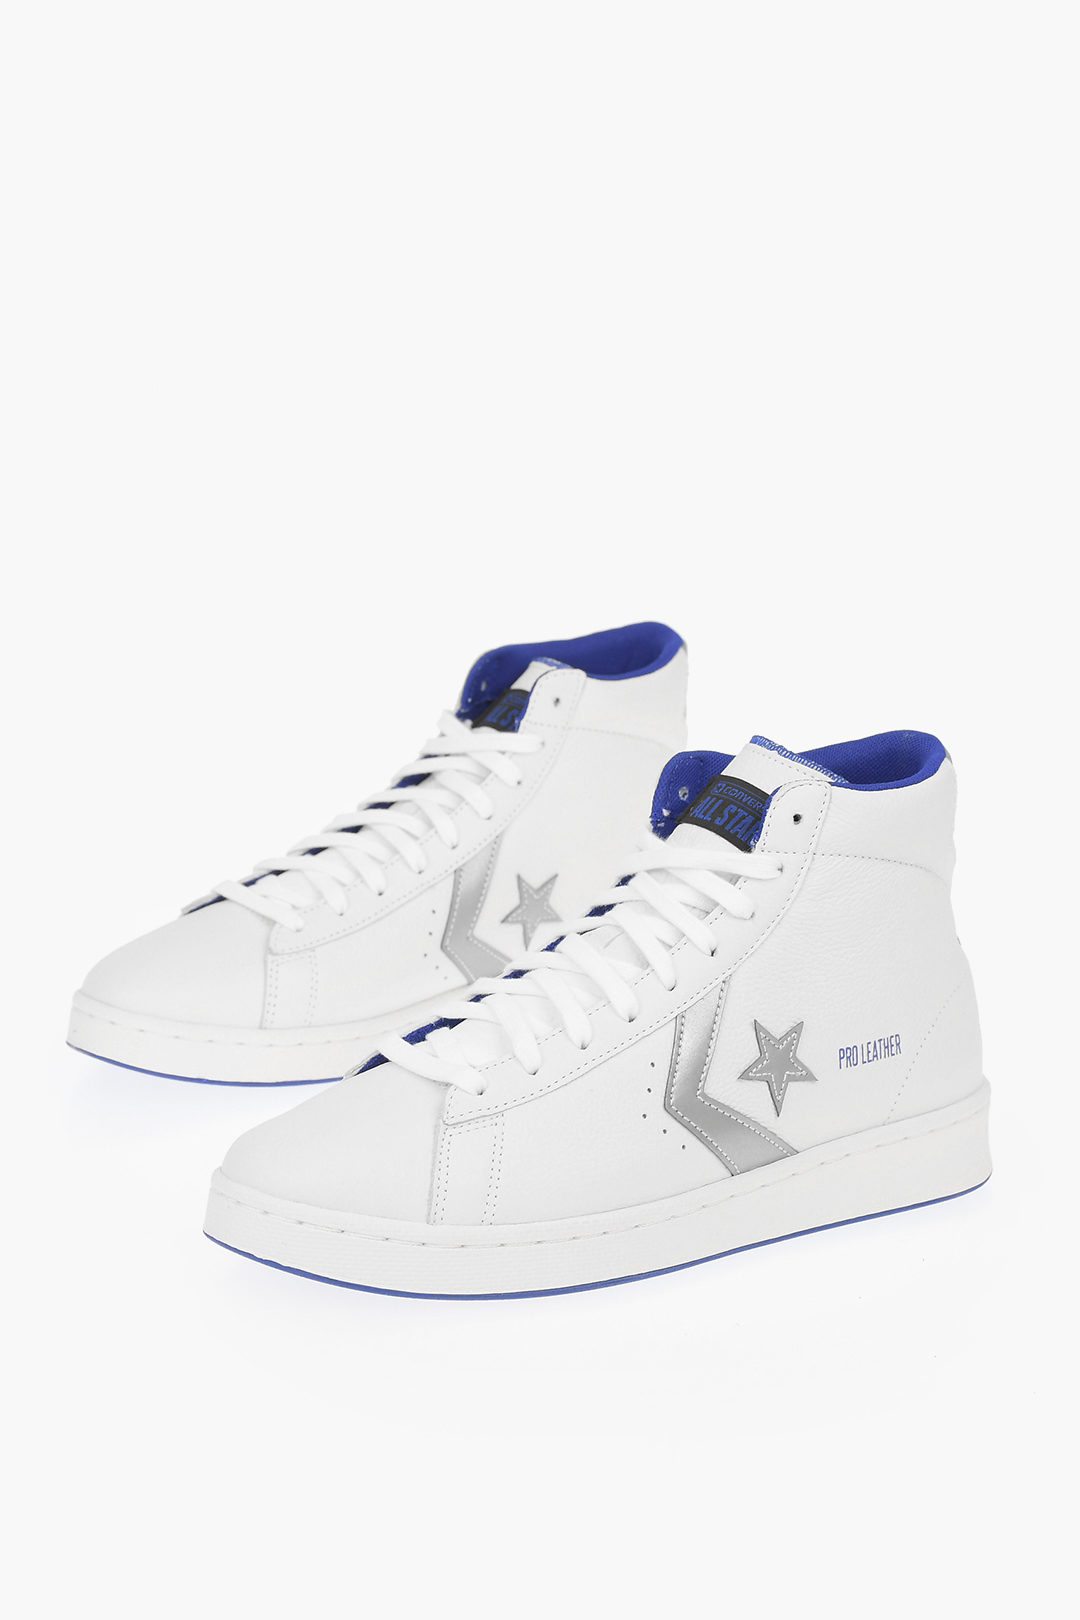 Sneakers PRO REFLECTIVE in Pelle اميا